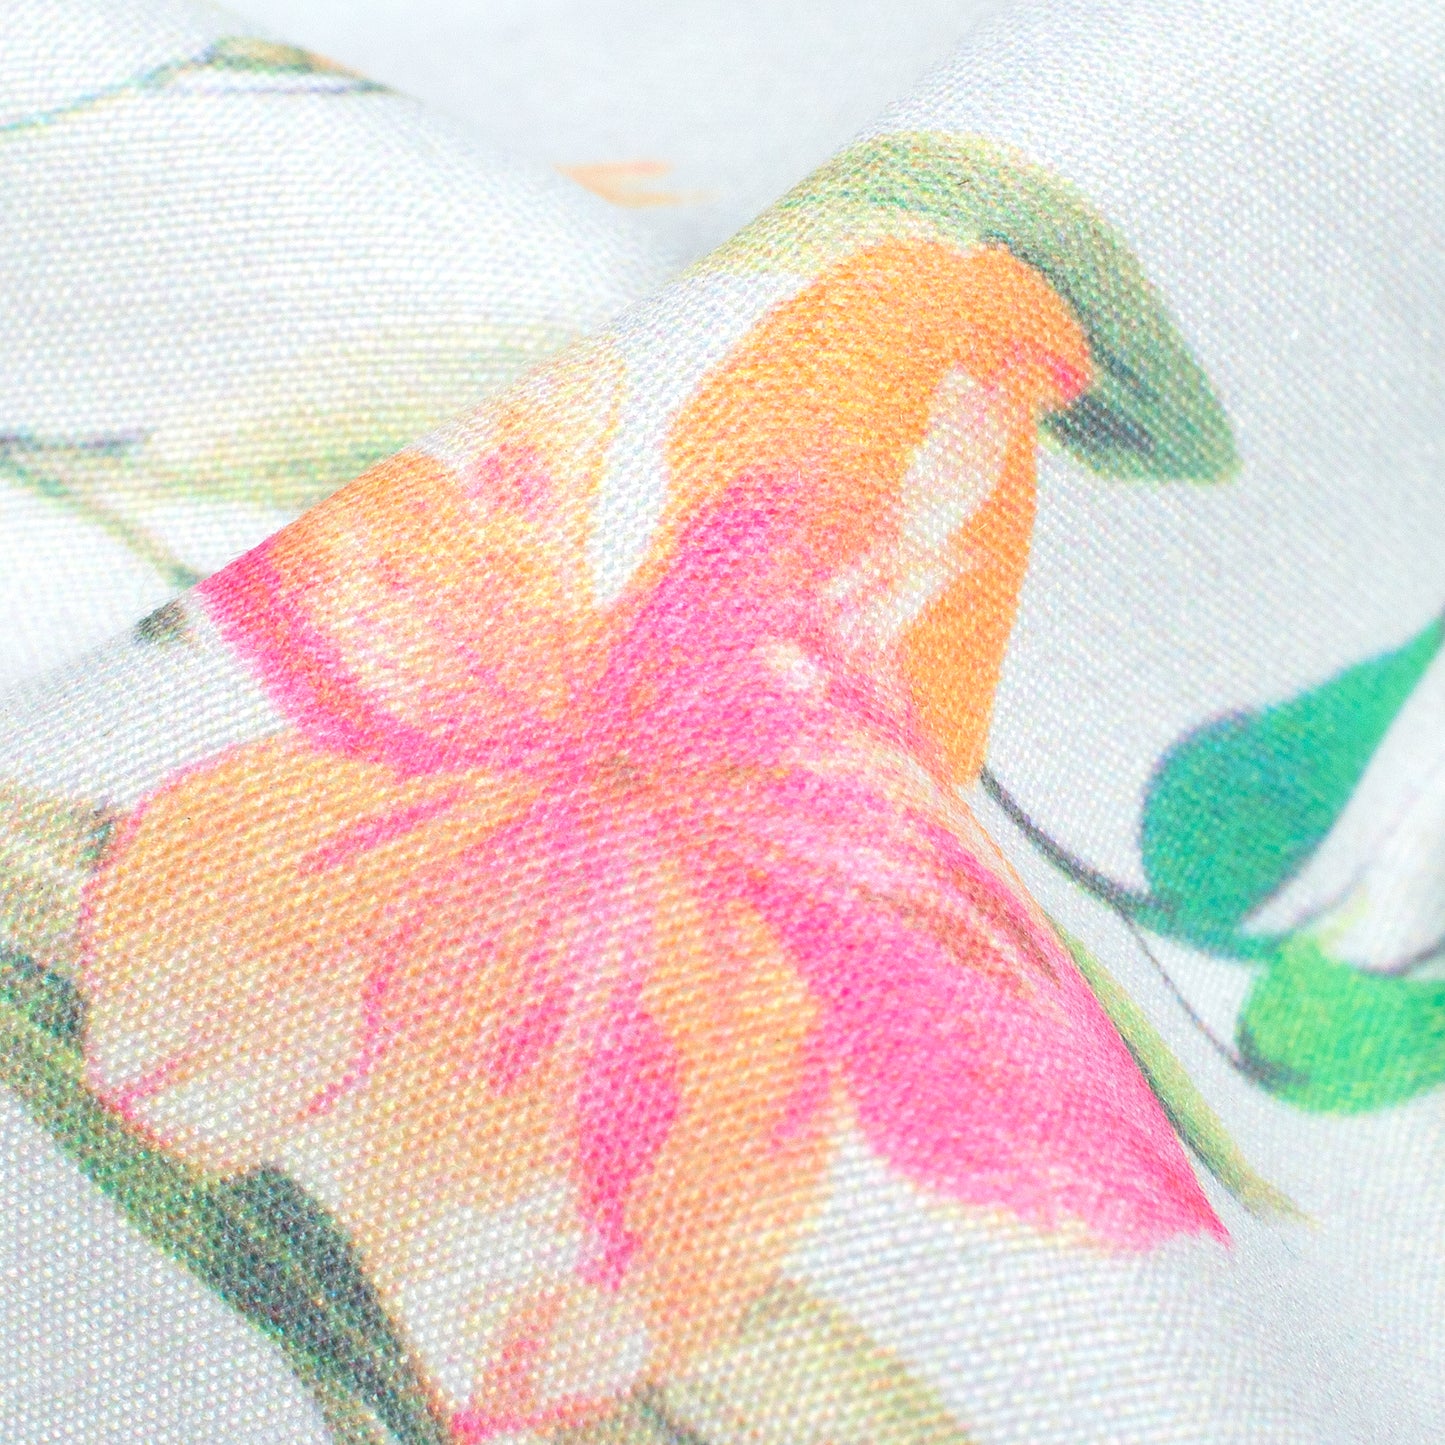 White And Taffy Pink Floral Pattern Digital Print Muslin Fabric